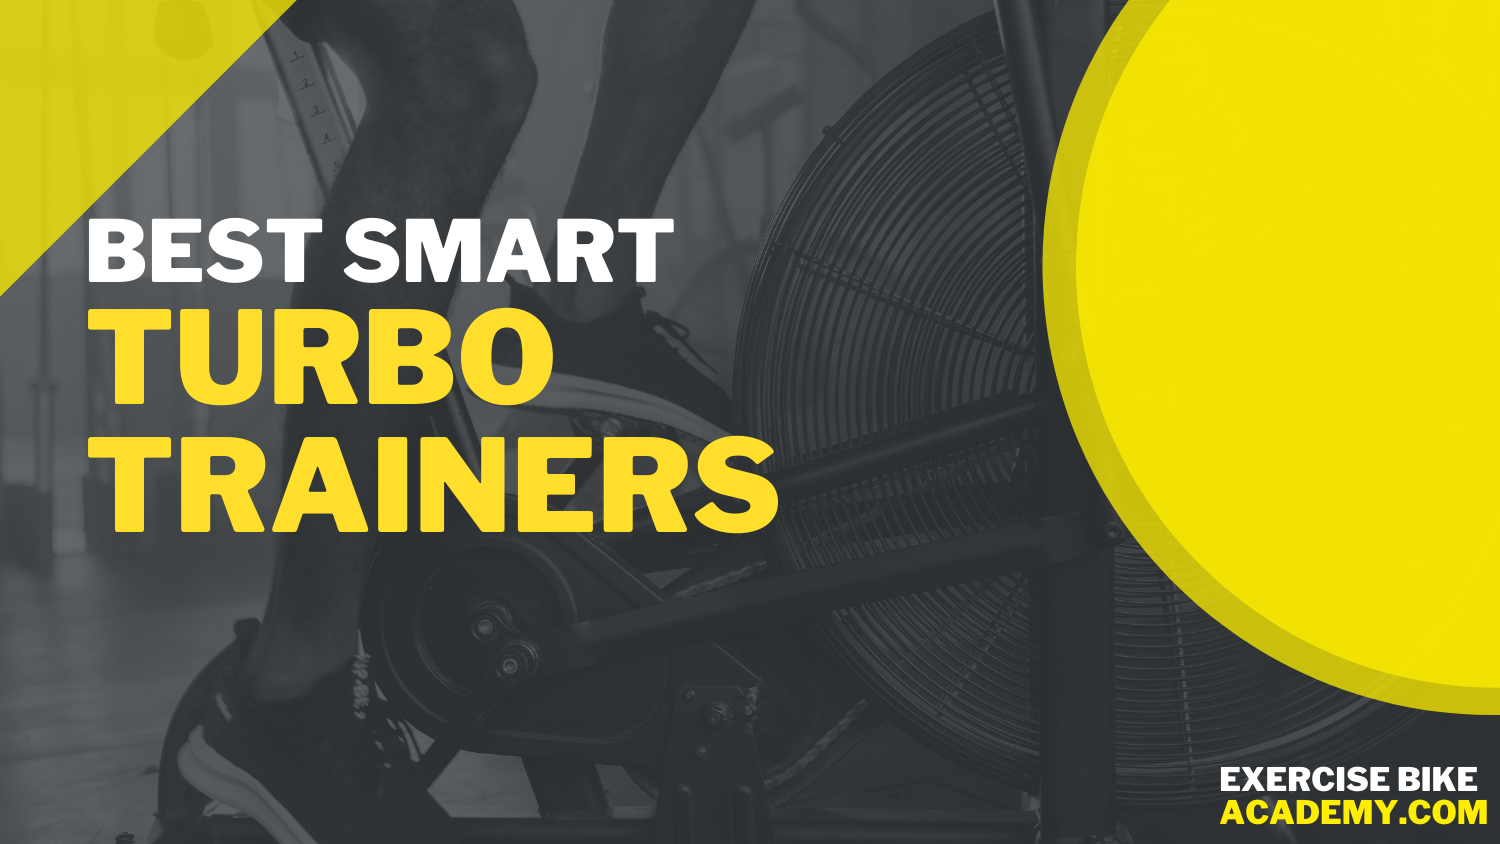 6 of the Best Smart Turbo Trainers To Buy Now